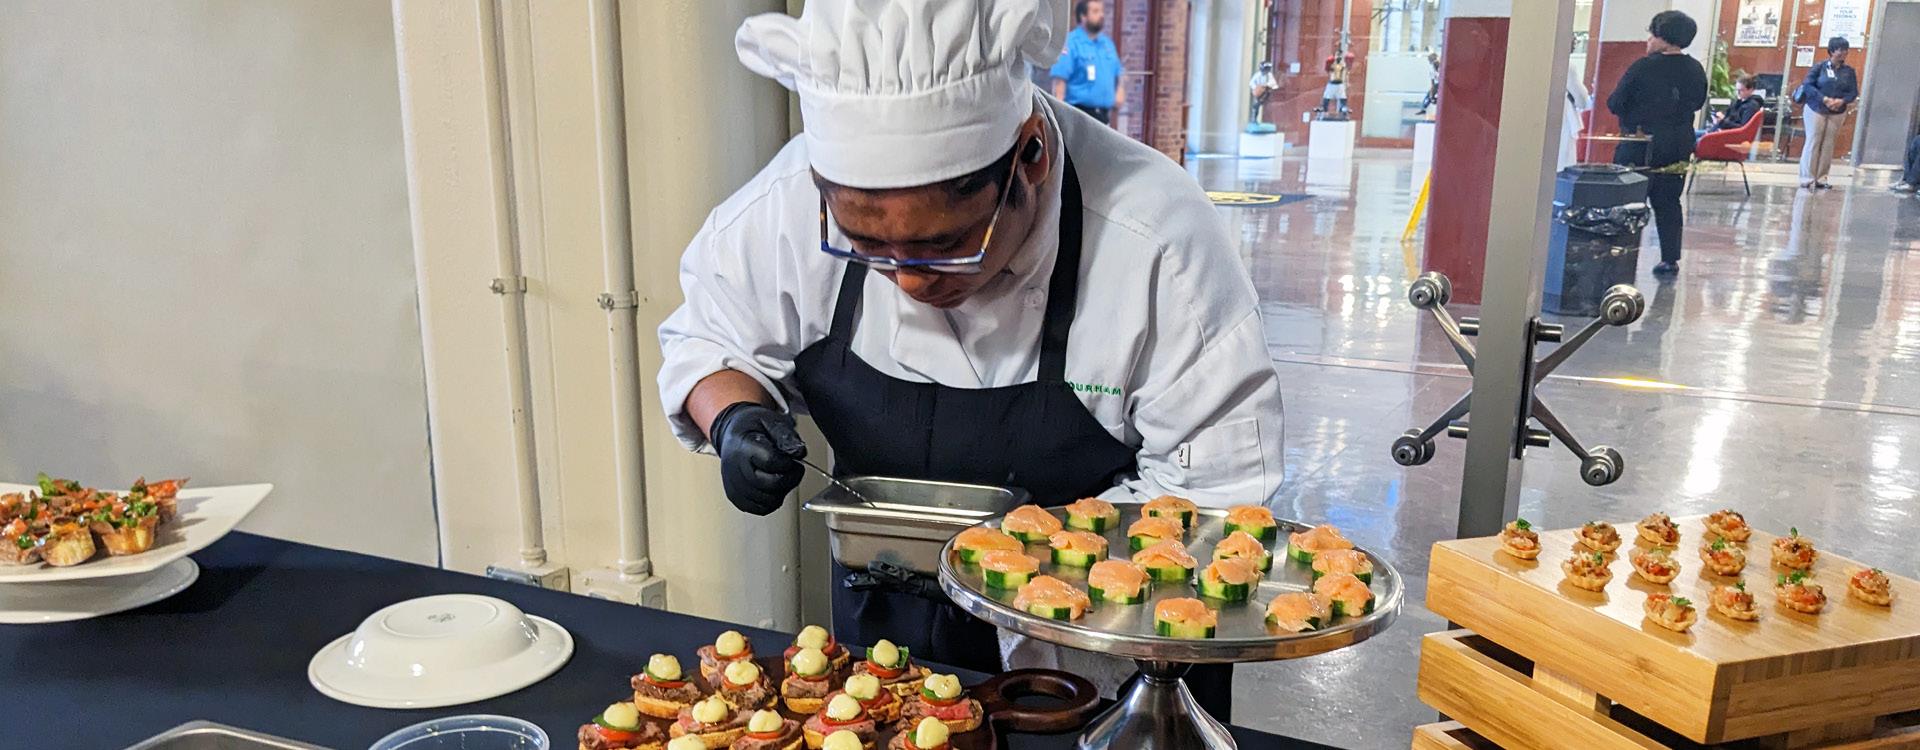 culinary student puts final touches on an appetizer display